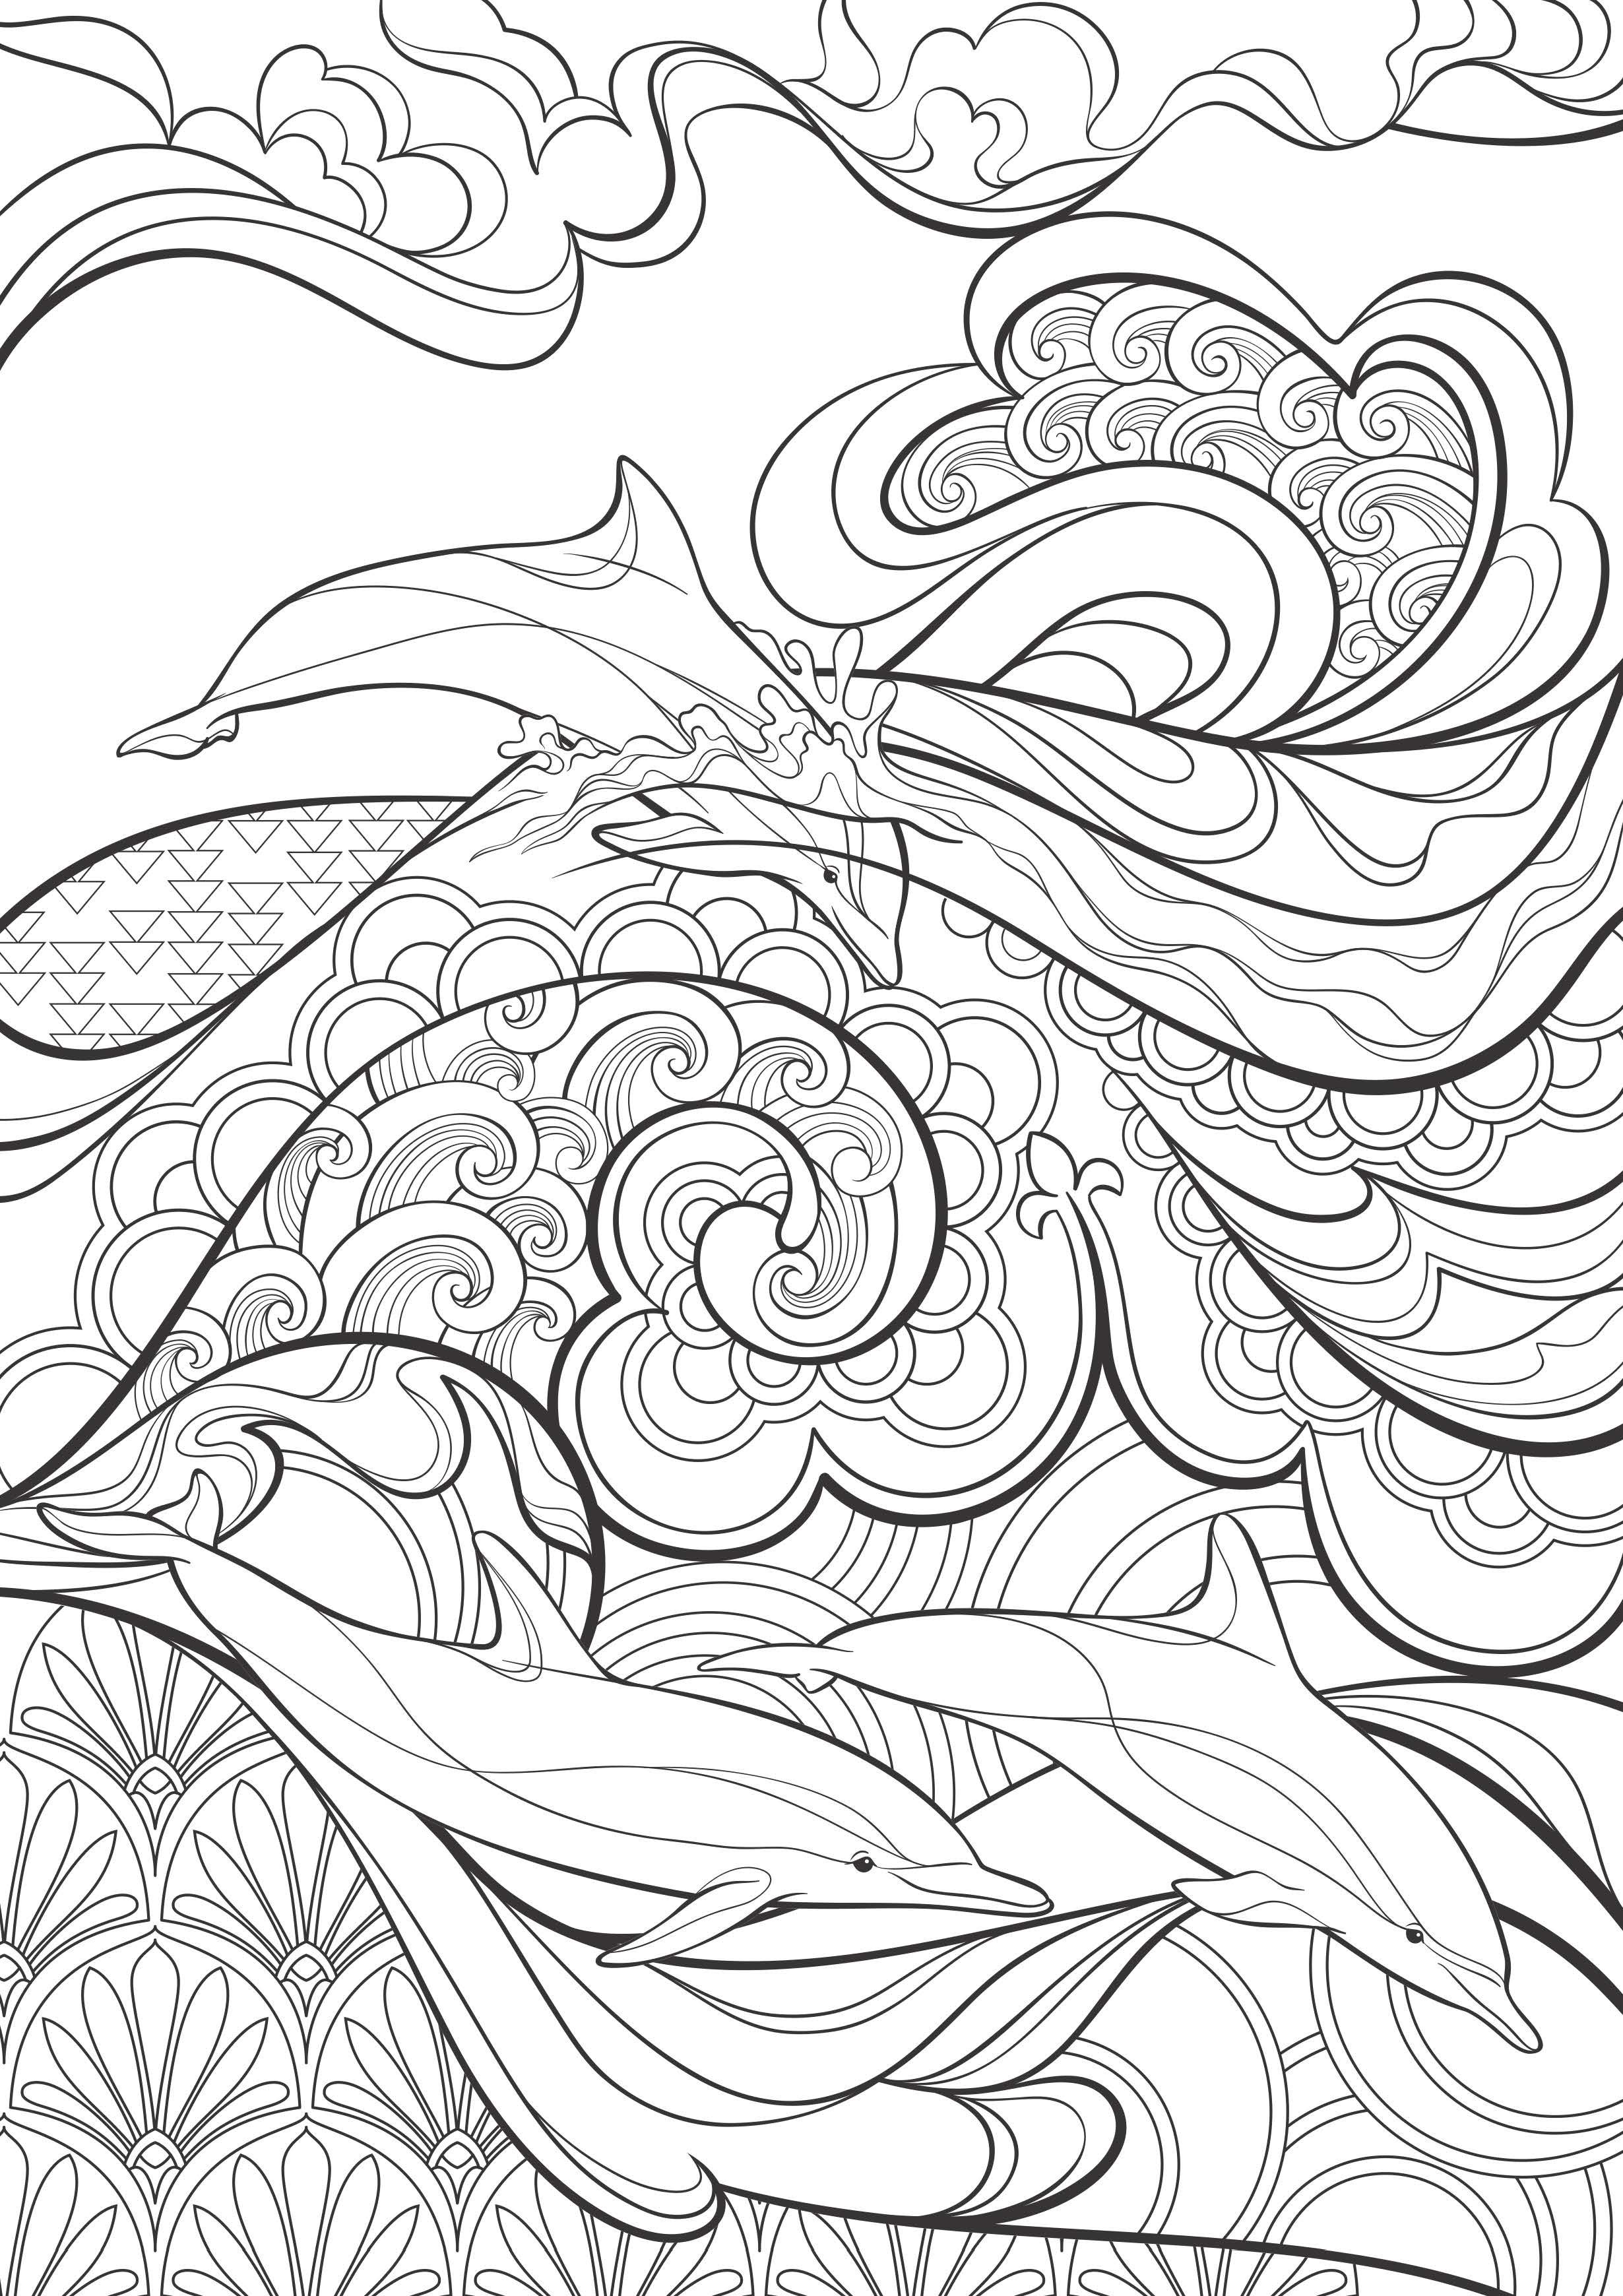 These Free Printable Disney Coloring Pages Are Full Of Family Fun - News 